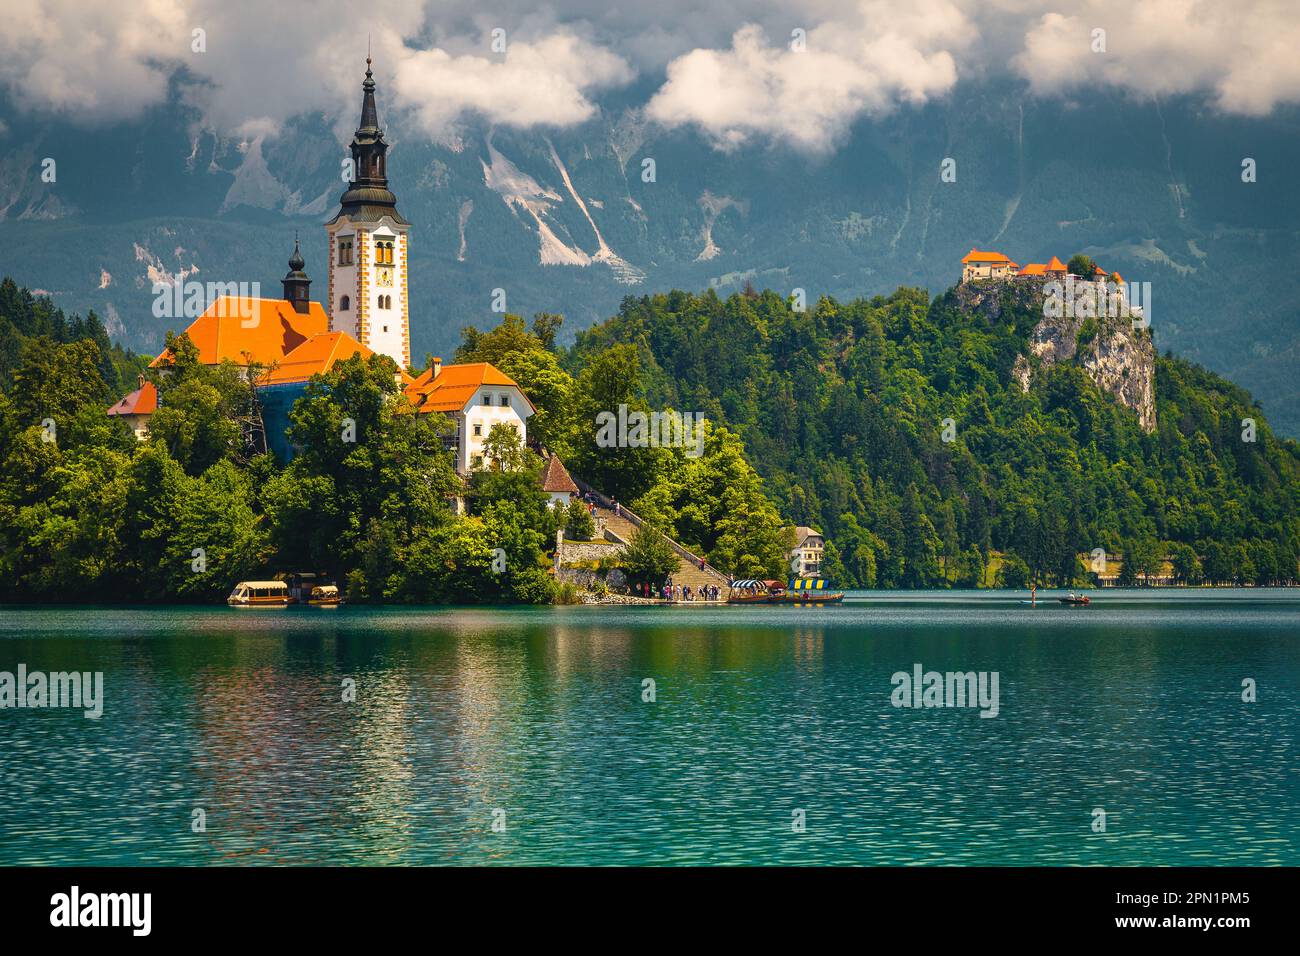 Popular travel destination and boat tours on the lake Bled. Majestic old church on the island and castle on the cliff, Bled, Slovenia, Europe Stock Photo